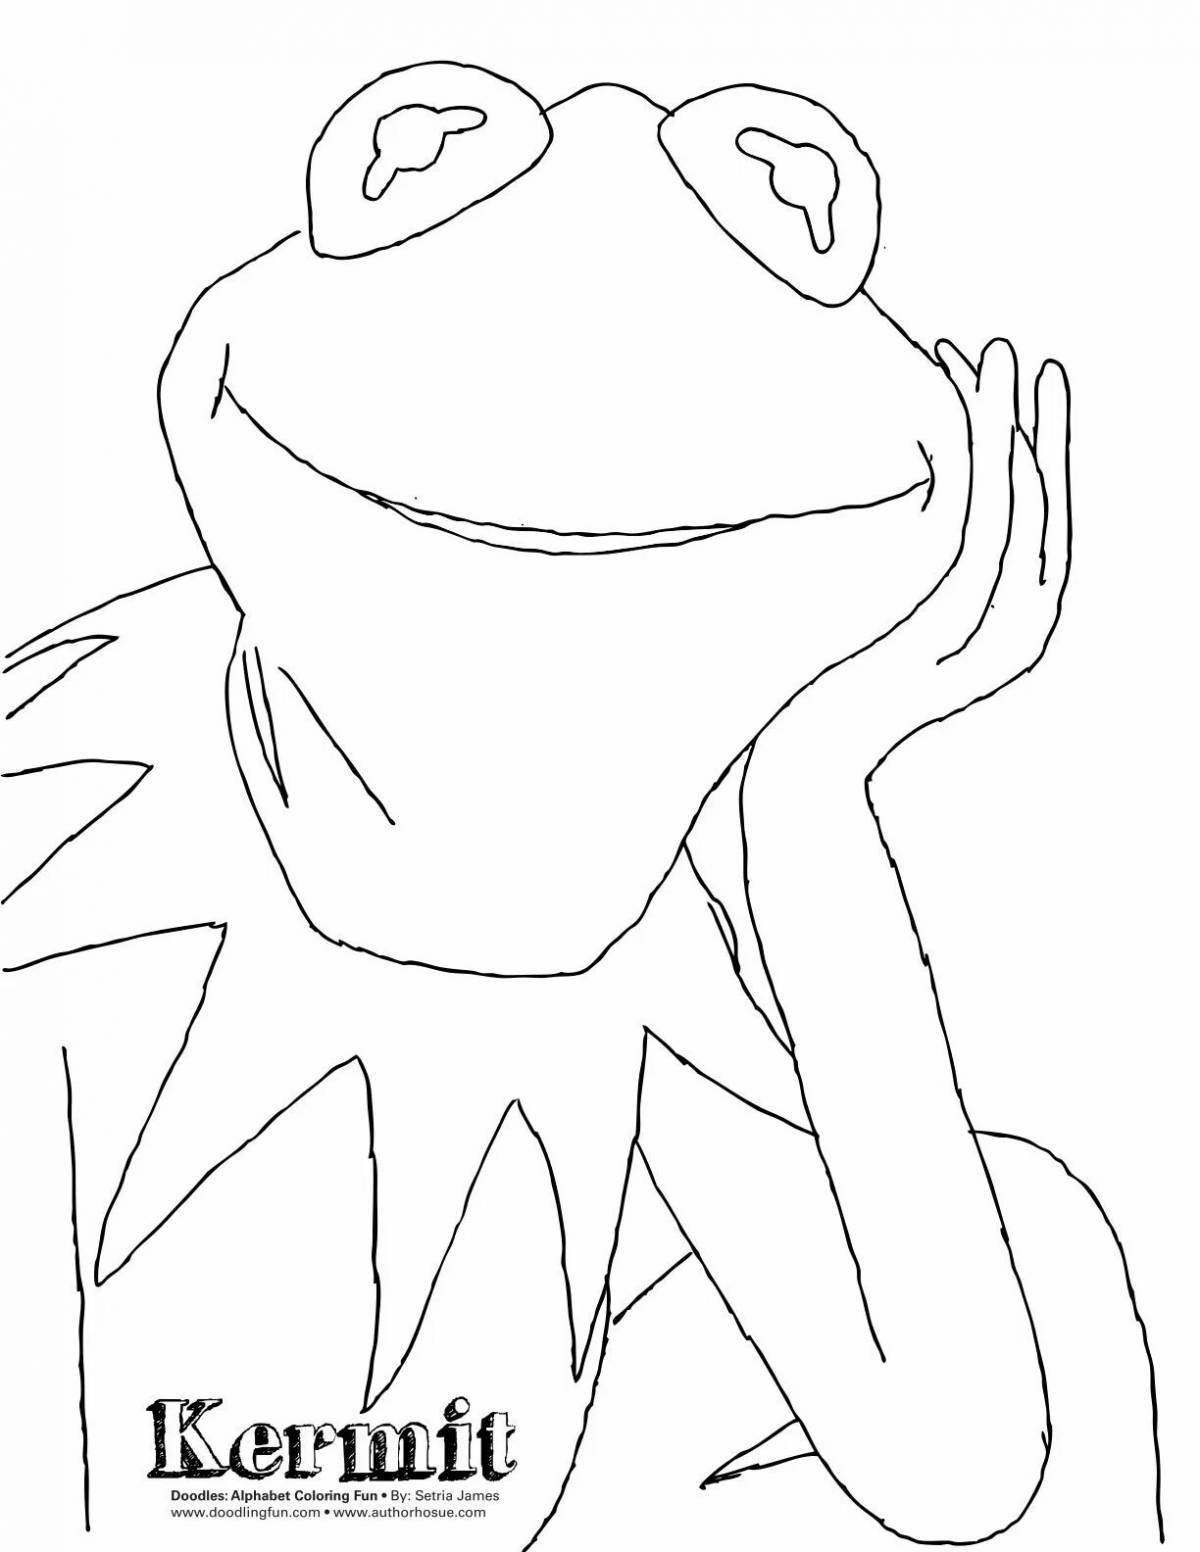 Animated frog meme coloring page